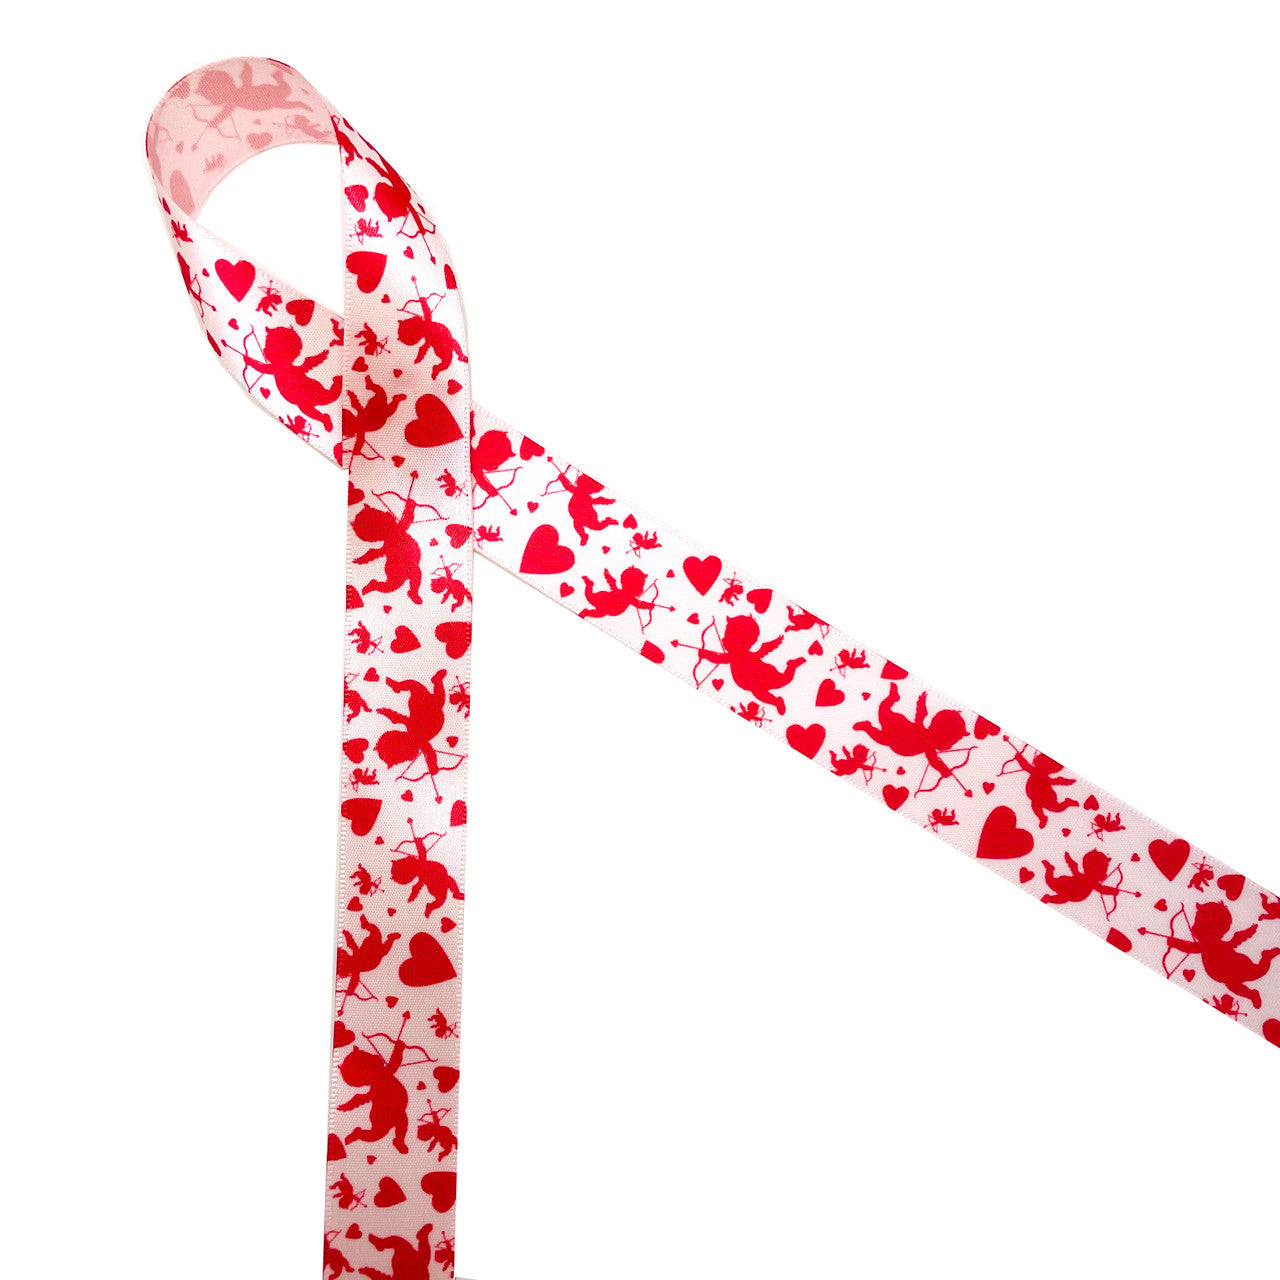 Cupid is aiming his arrows at hearts large and small creating Valentine fun!  Be sure to have this ribbon on hand for Valentine parties, favors, gifts, cookies, candy tables and cake pops! This adorable ribbon is printed in red on 5/8" pink single face satin ribbon.